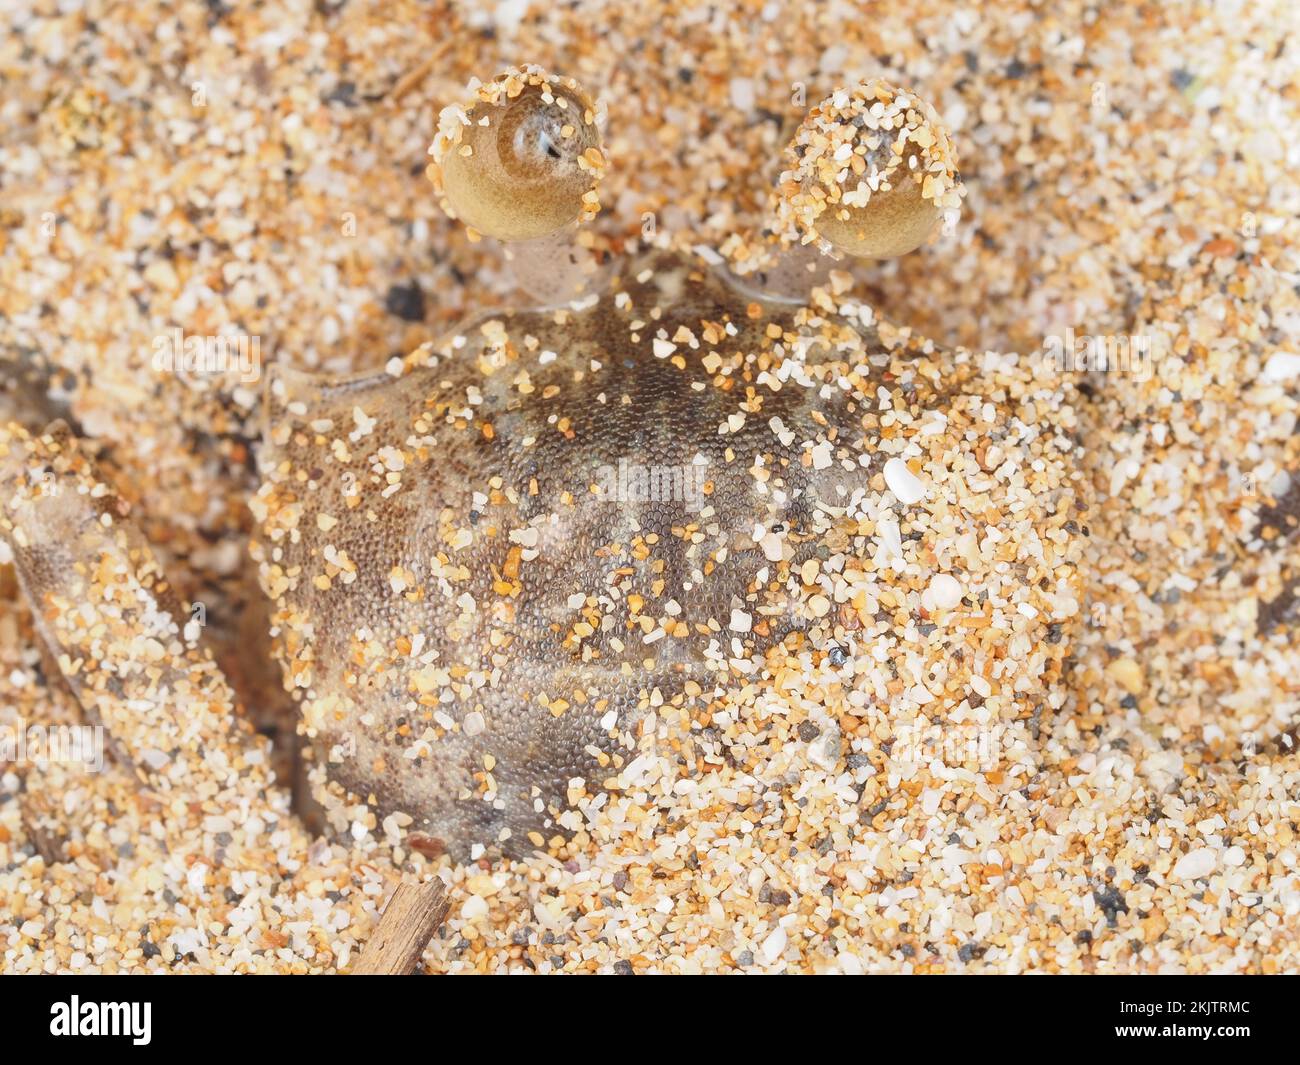 Small crab hiding in sand on Maui, Hawaii Stock Photo